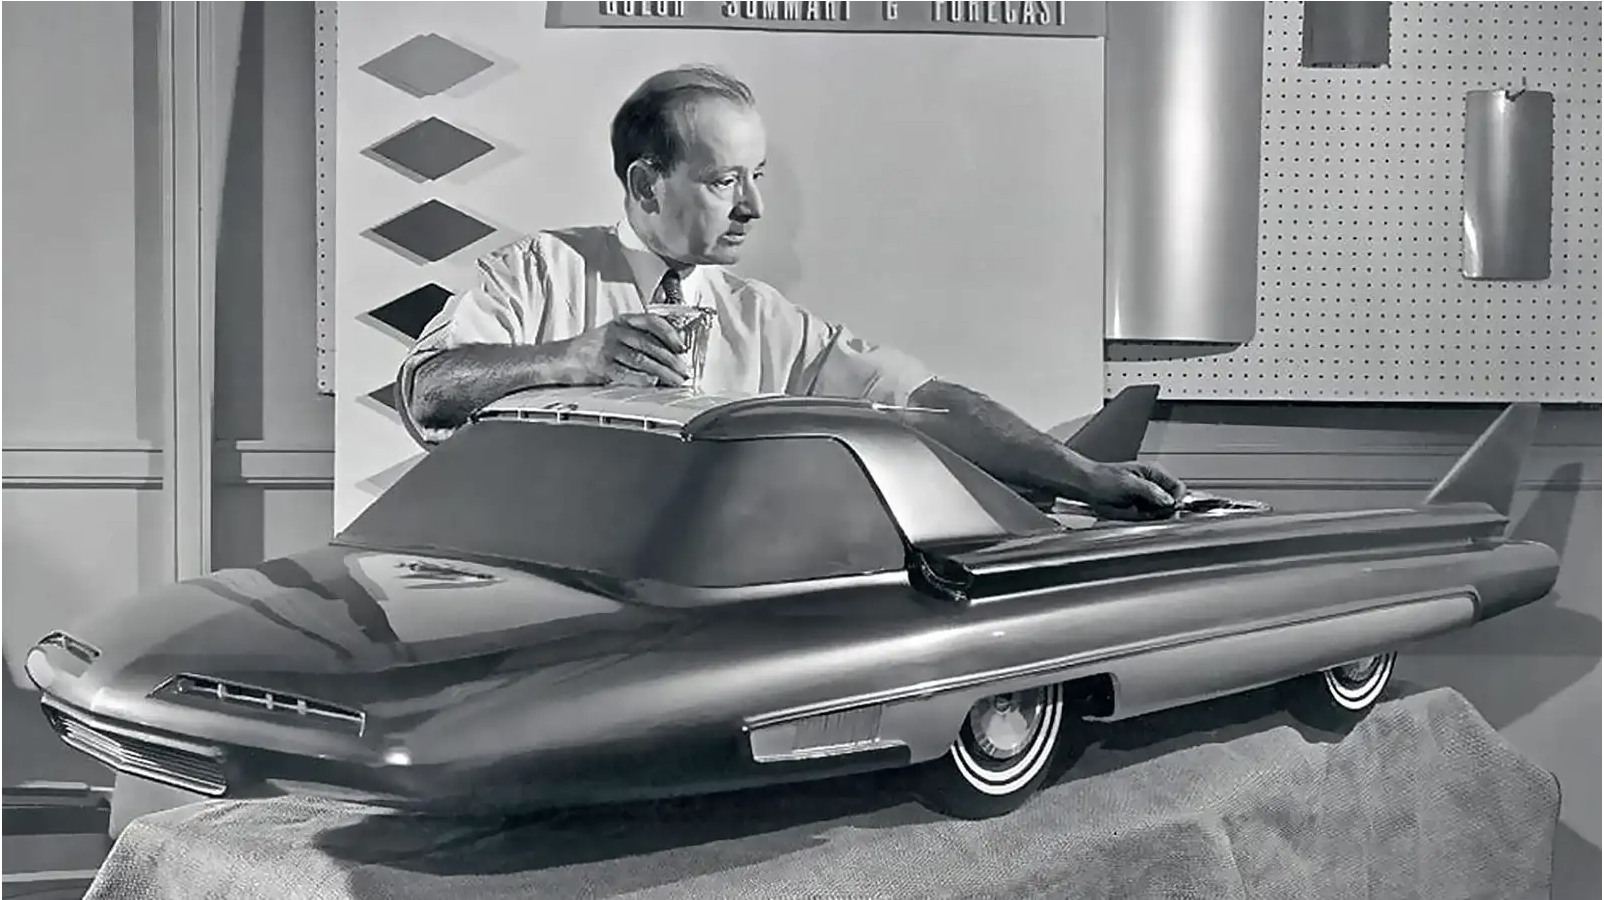 Ford’s Nuclear-Powered 1962 Concept Car Is a Fascinating Atomic-Age Fantasy